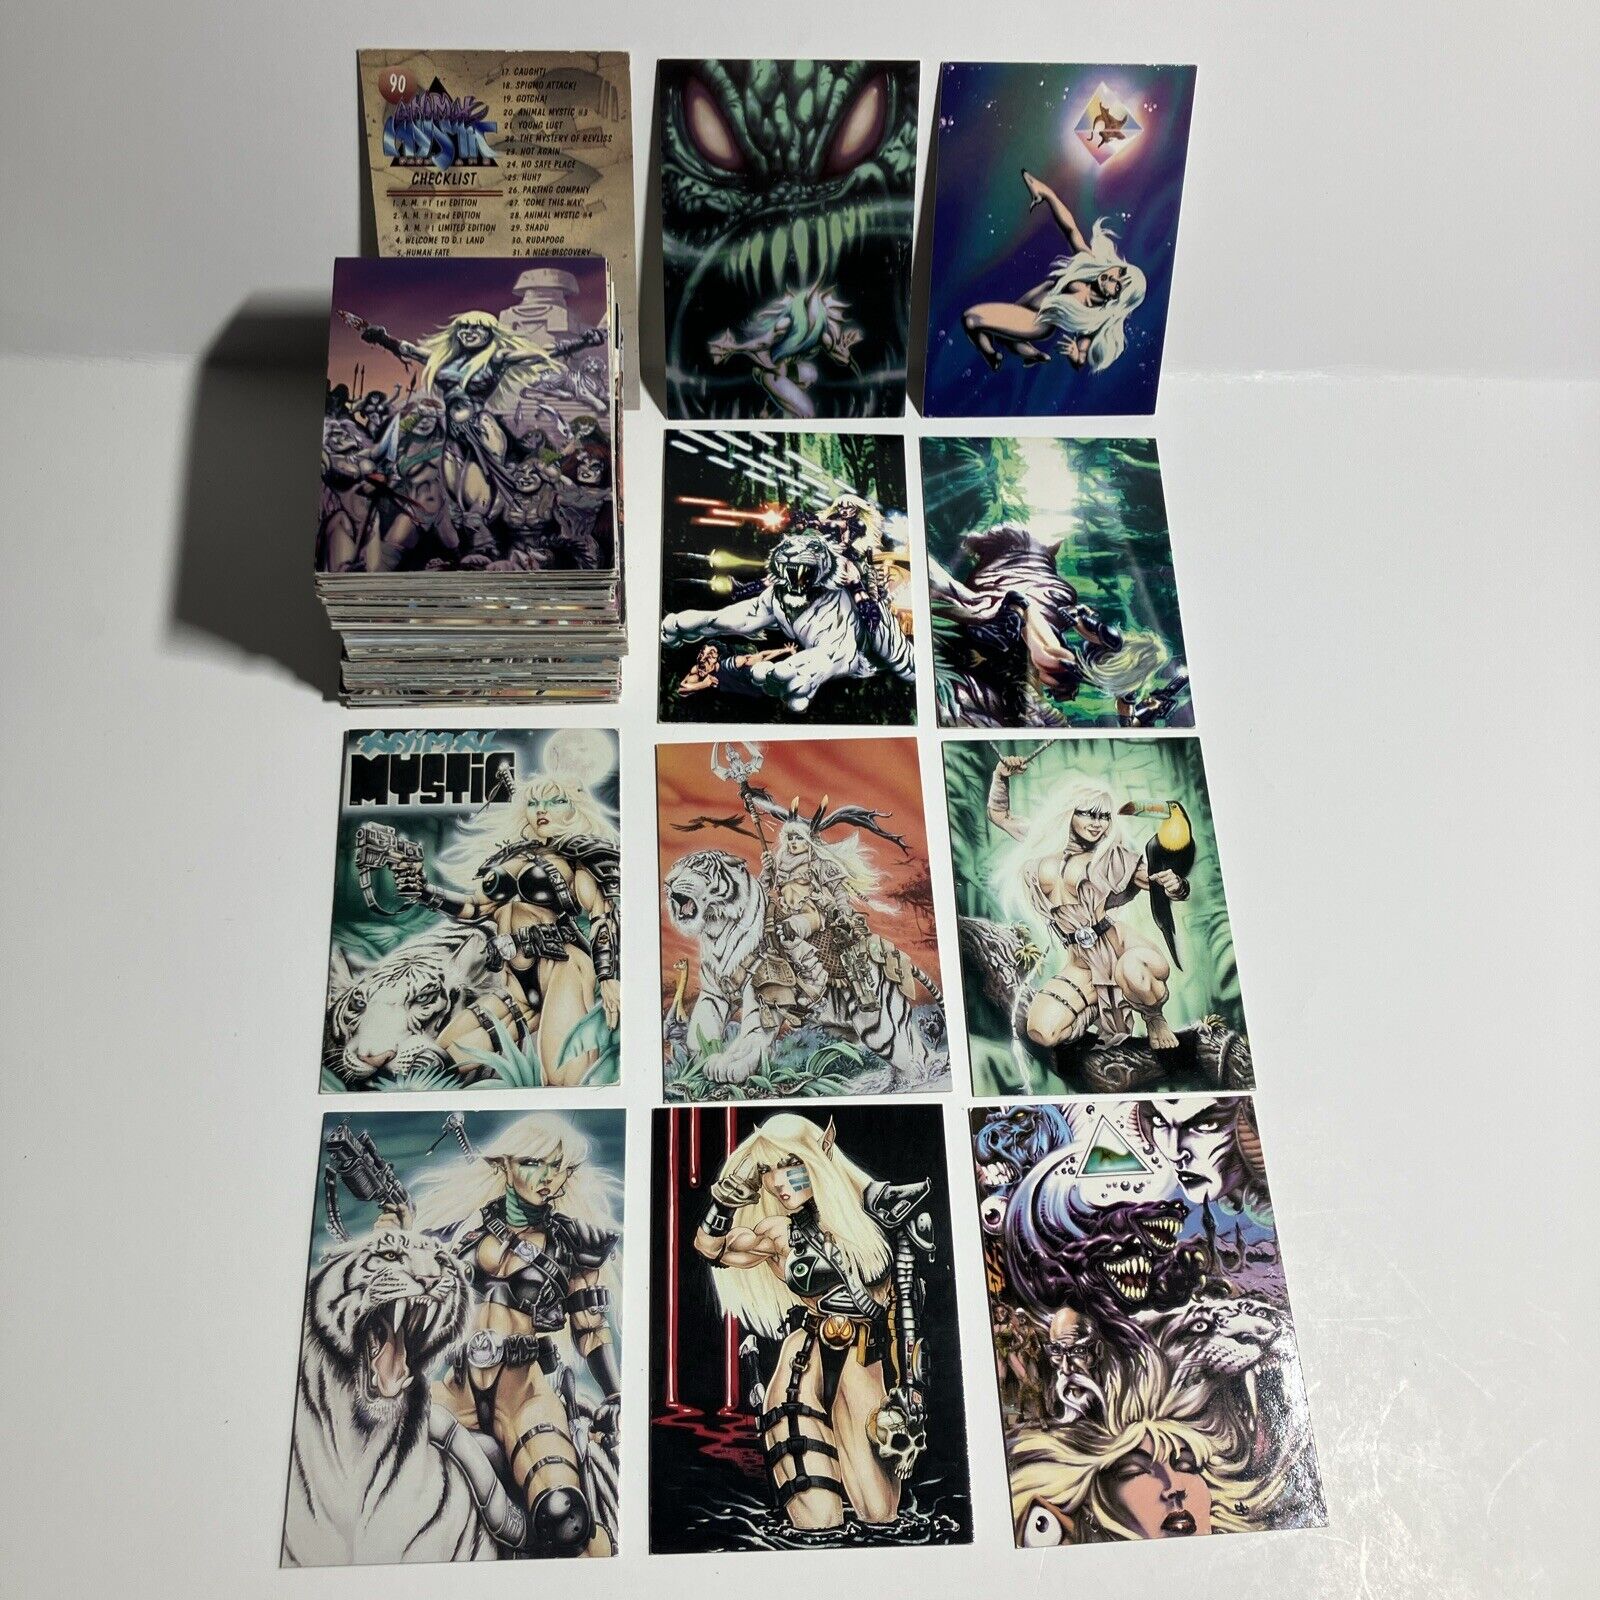 1996 ANIMAL MYSTIC - Comic Graphic ART - COMPLETE TRADING CARD SET 90 Cards MINT